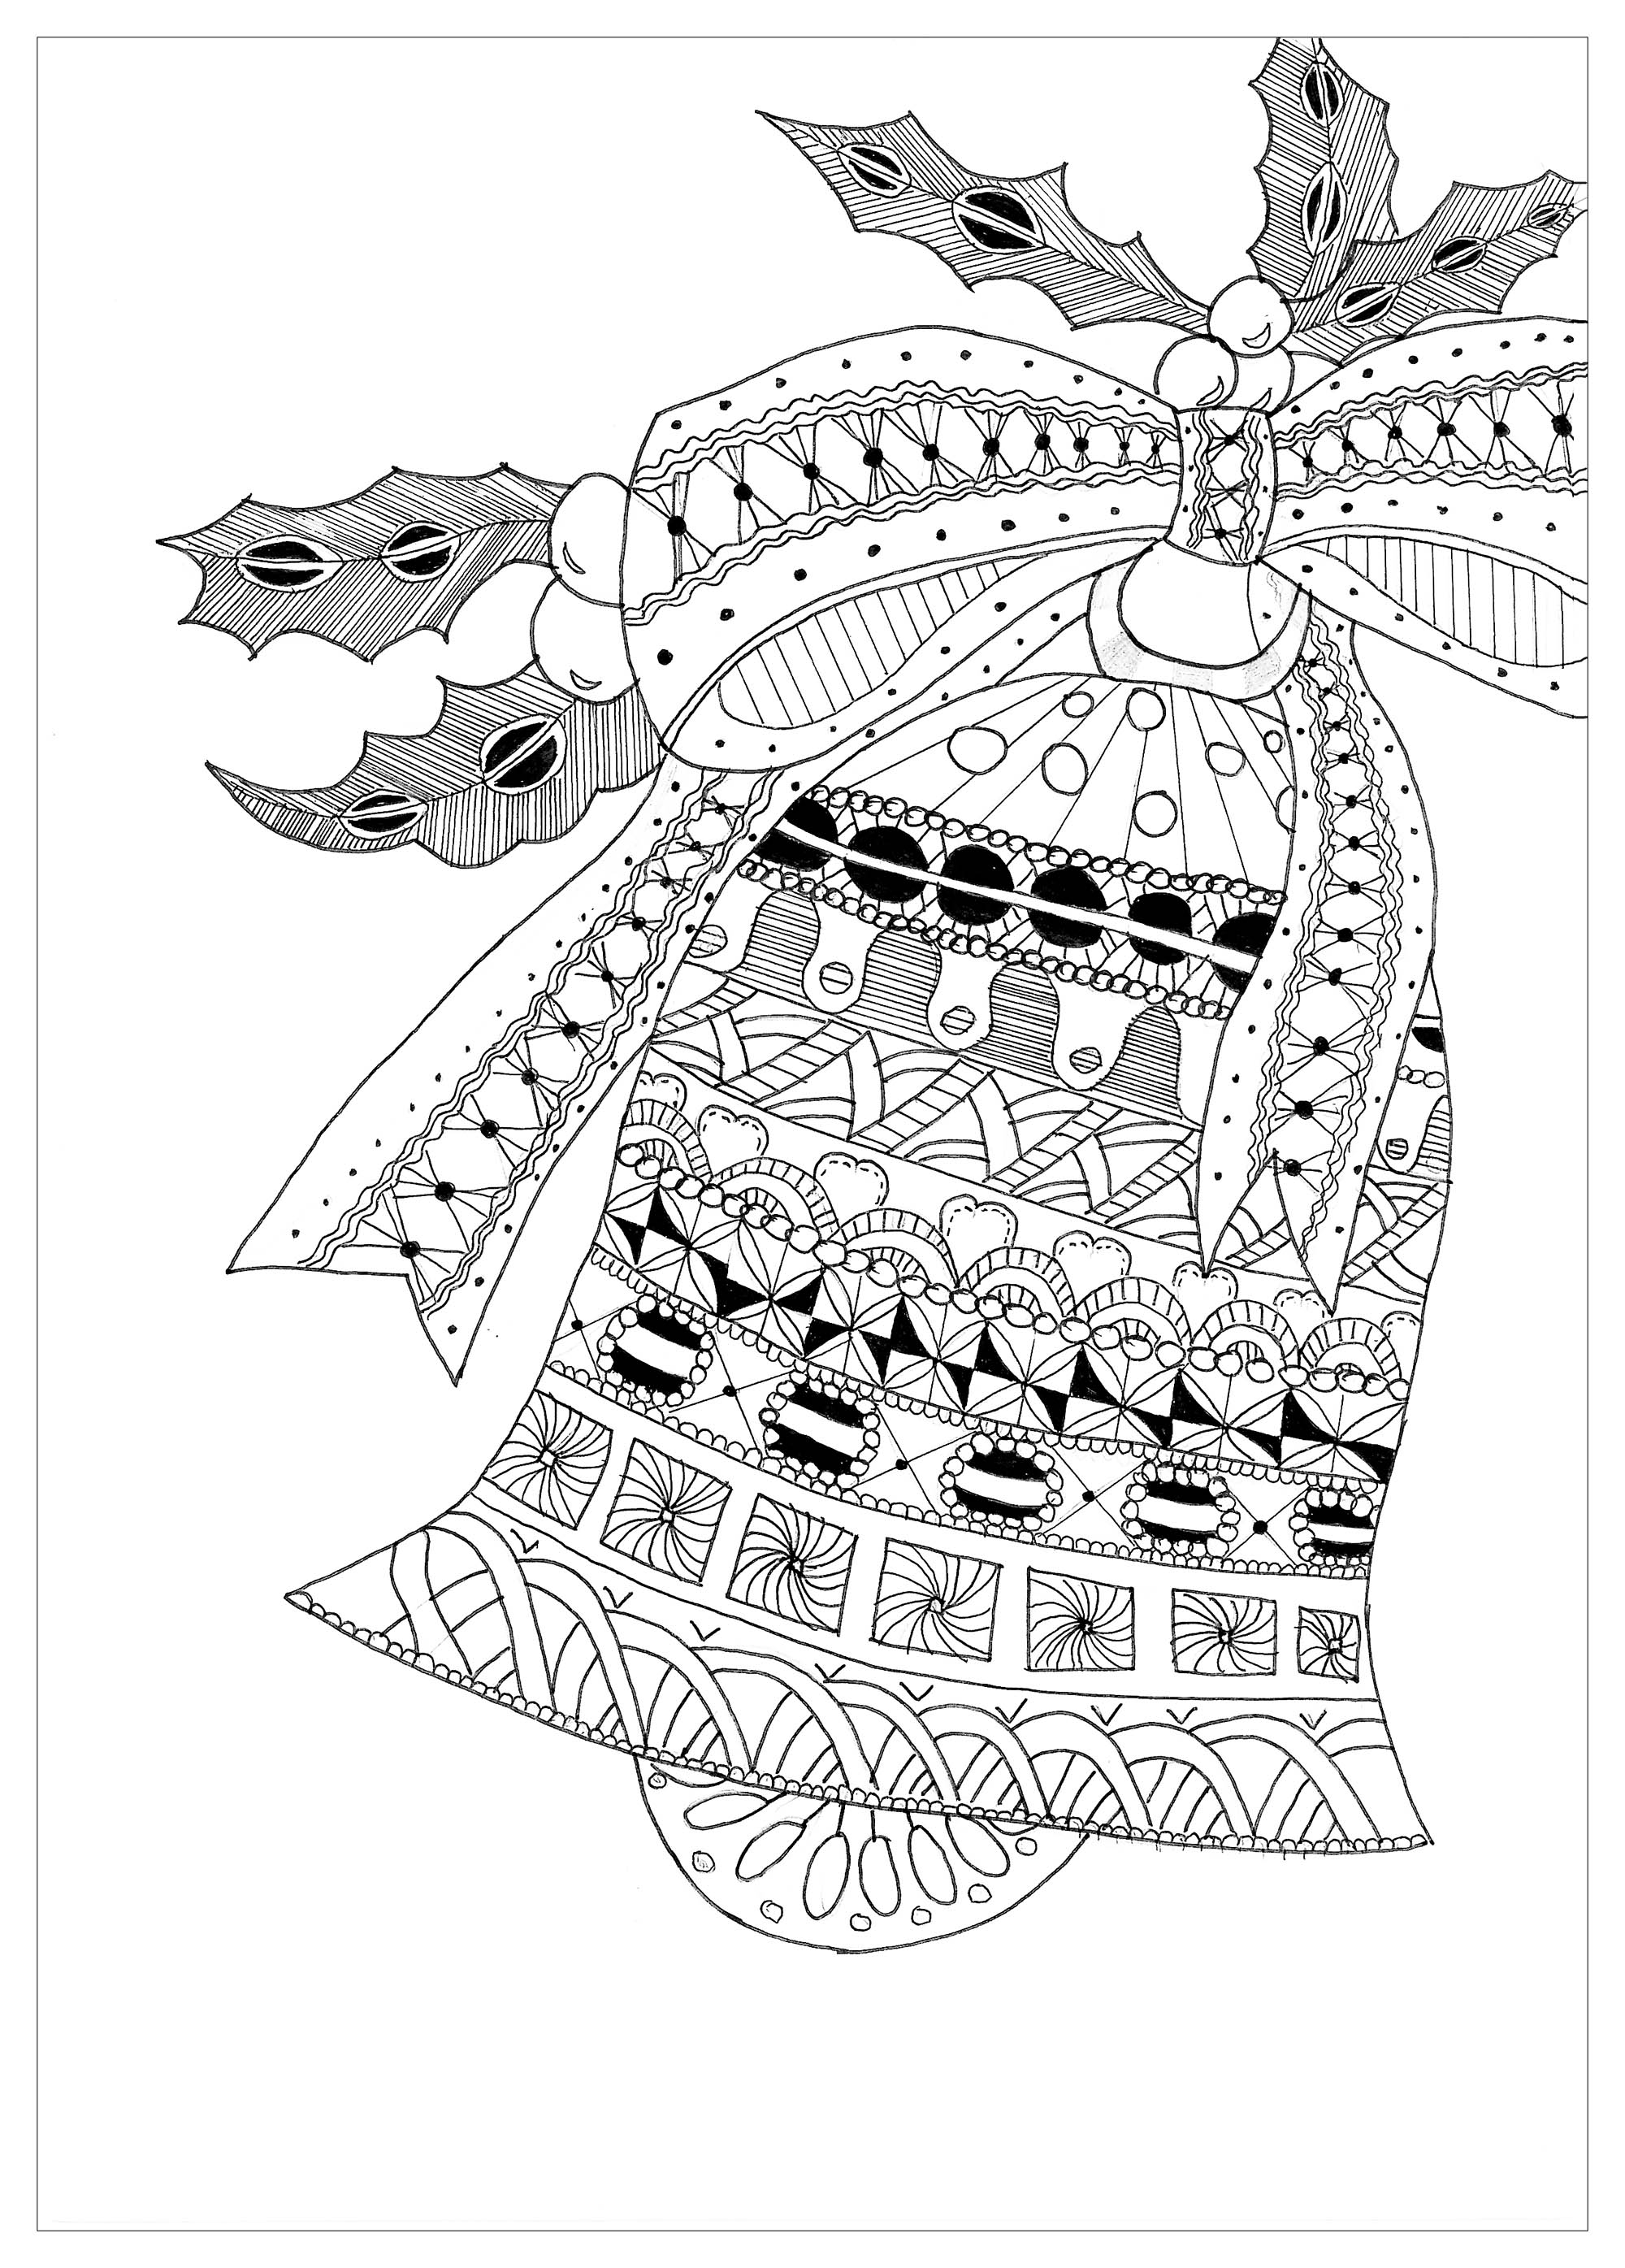 Children's Christmas Coloring Pages Free Coloring Pages Coloring Pages Nightmare Beforeristmas To Print